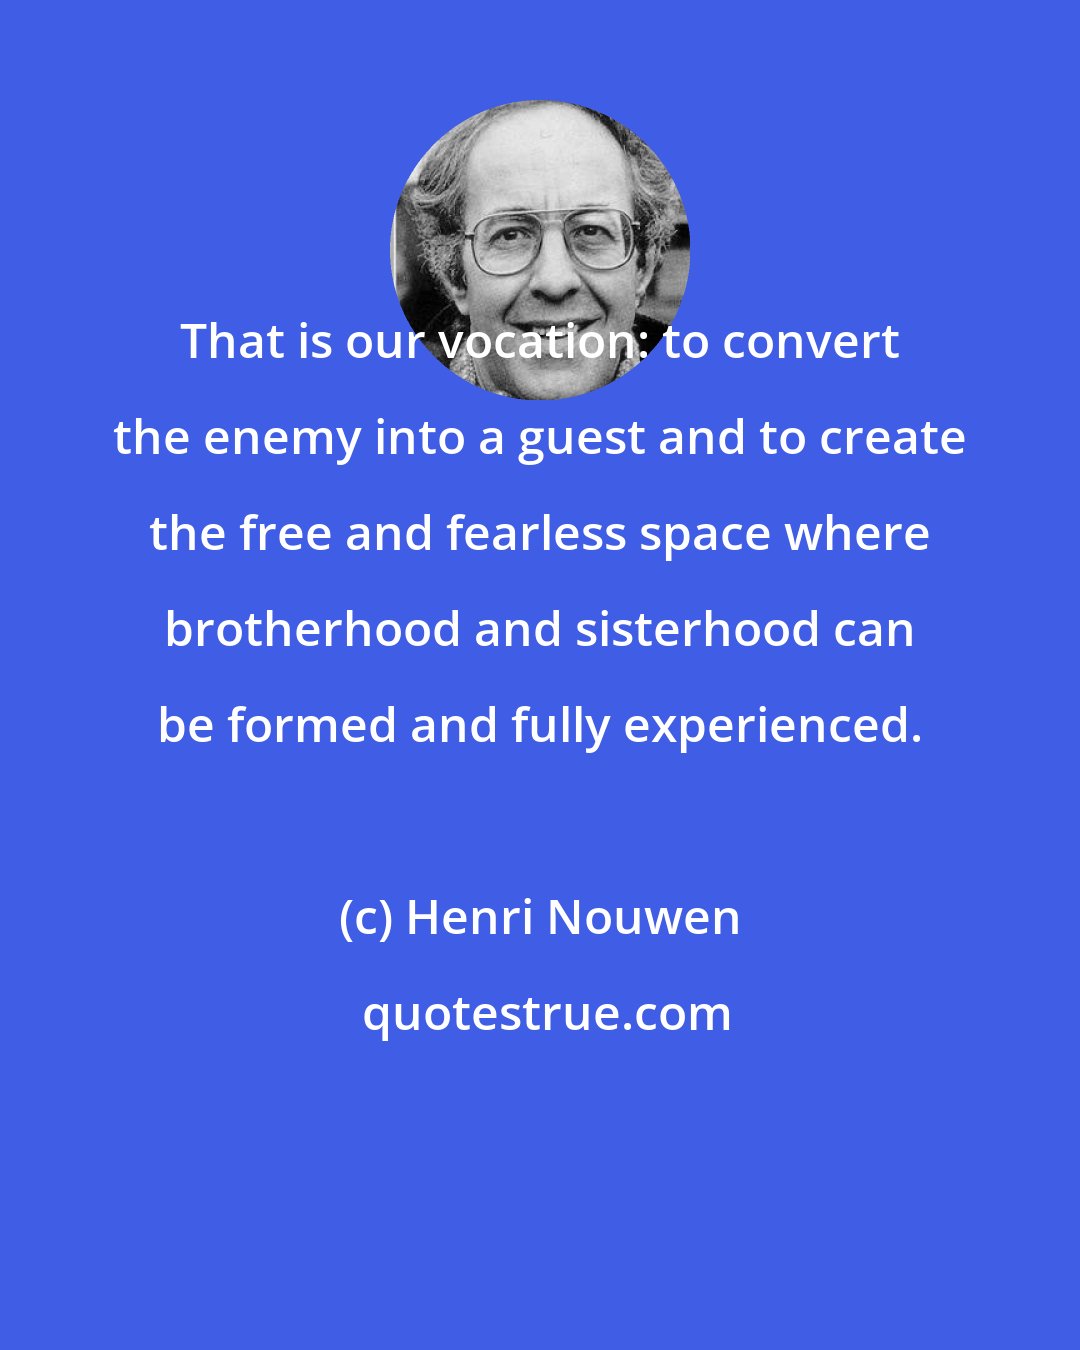 Henri Nouwen: That is our vocation: to convert the enemy into a guest and to create the free and fearless space where brotherhood and sisterhood can be formed and fully experienced.